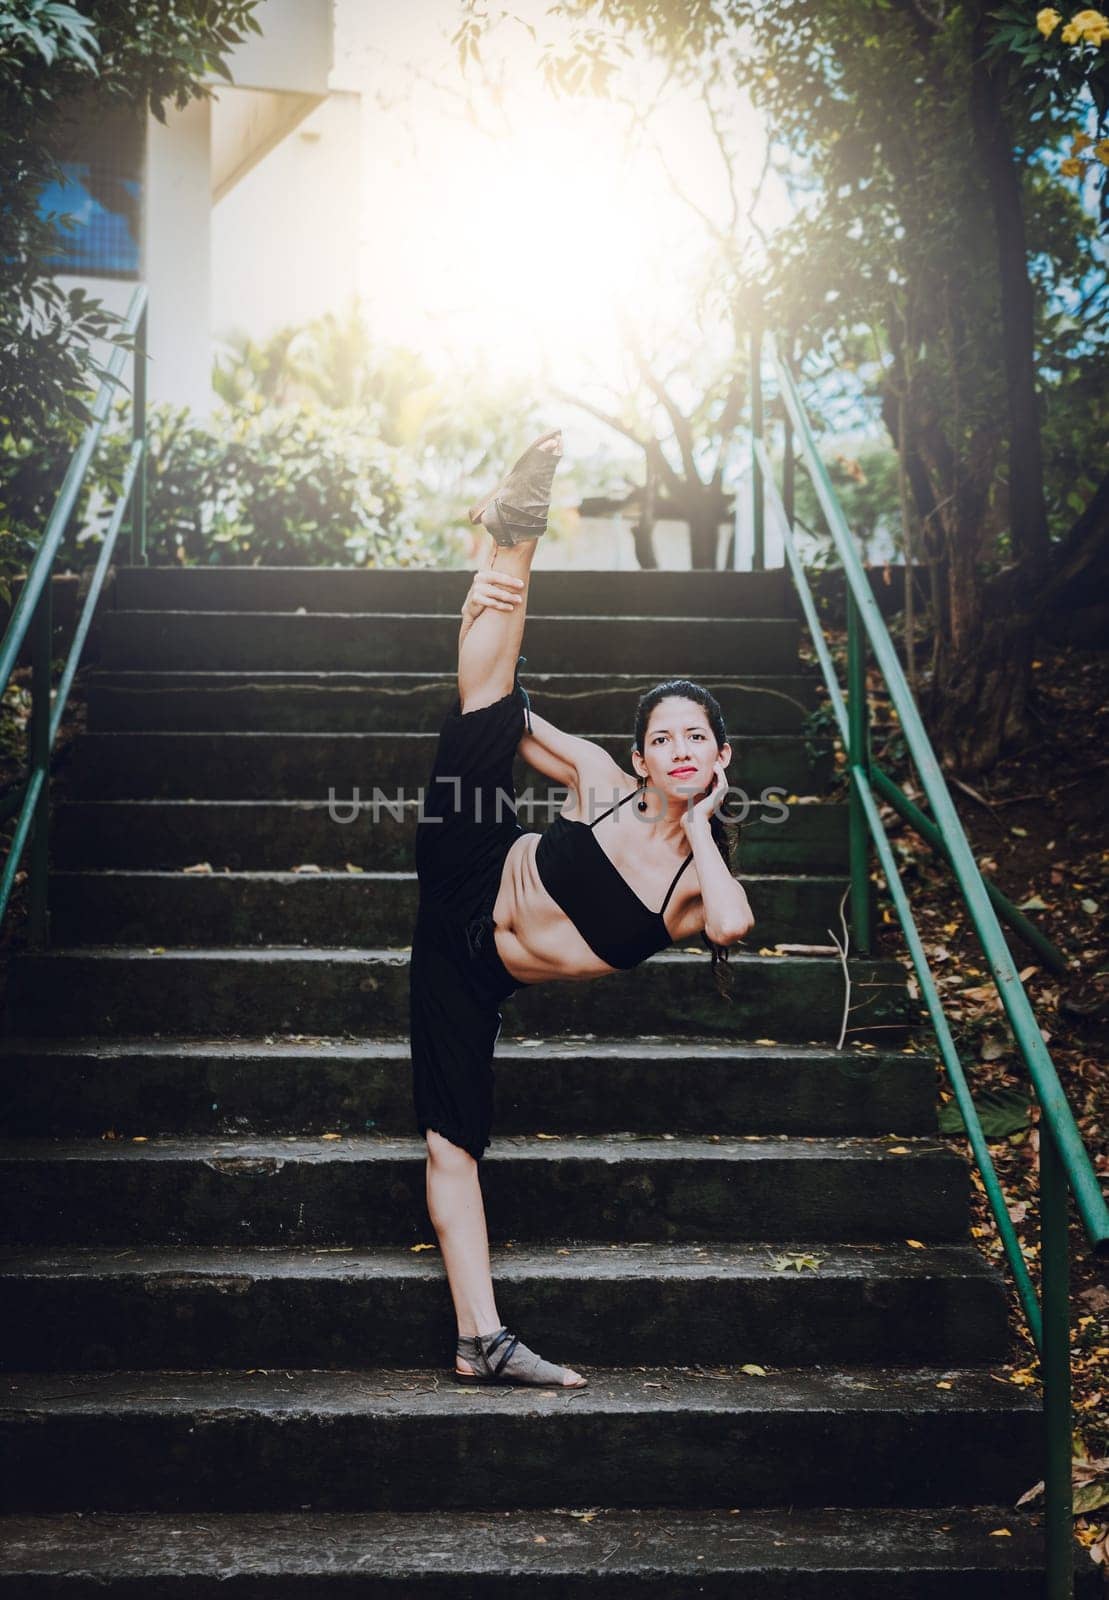 Dance artist girl doing acrobatics and flexibilities in heels. Dance girl doing flexibility on the stairs outdoor. Portrait of woman dancer in heels doing yoga flexibilities by isaiphoto